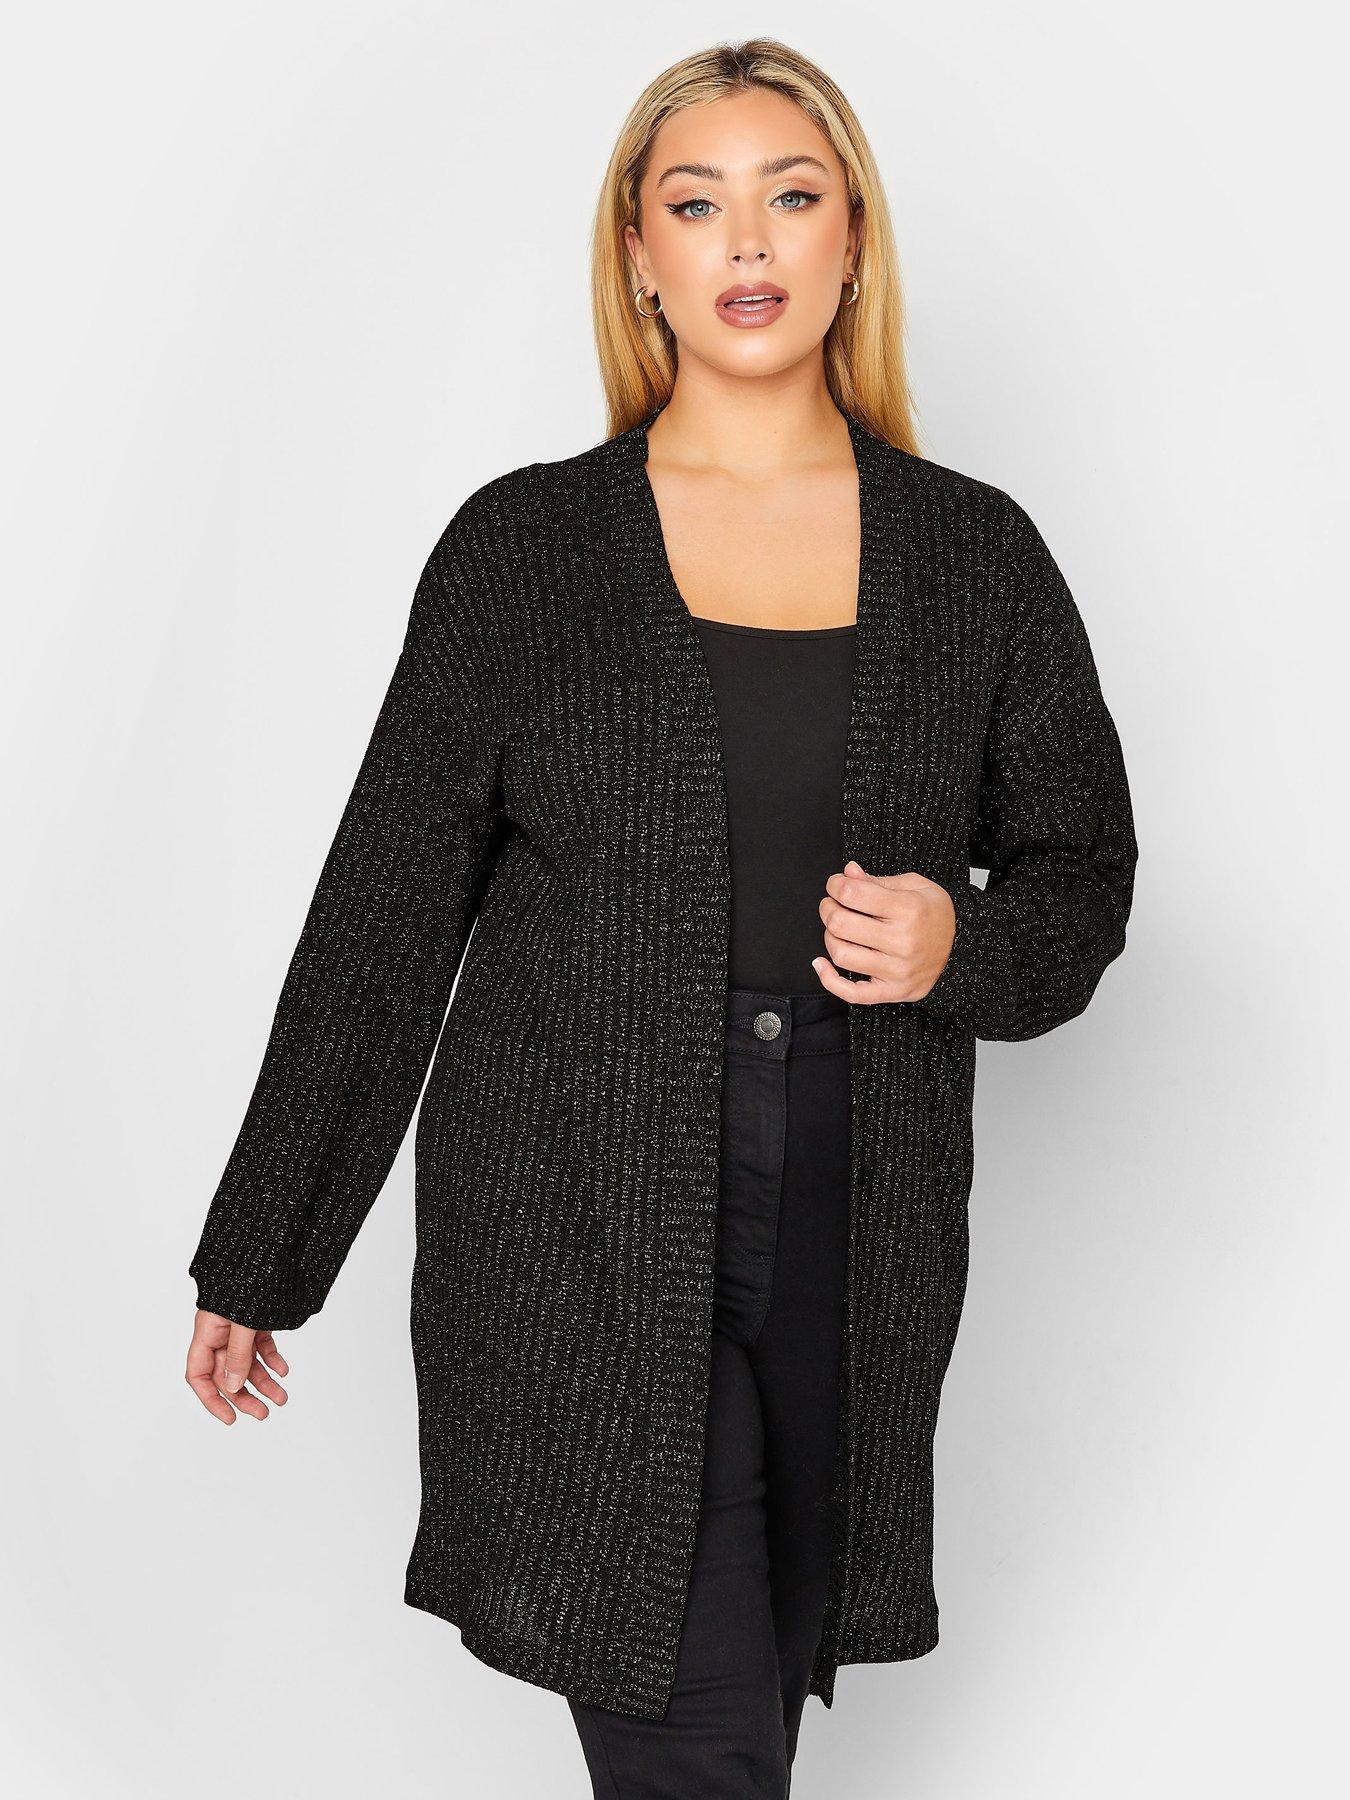 Yours Hooded Shimmer Cardigan - Black | very.co.uk